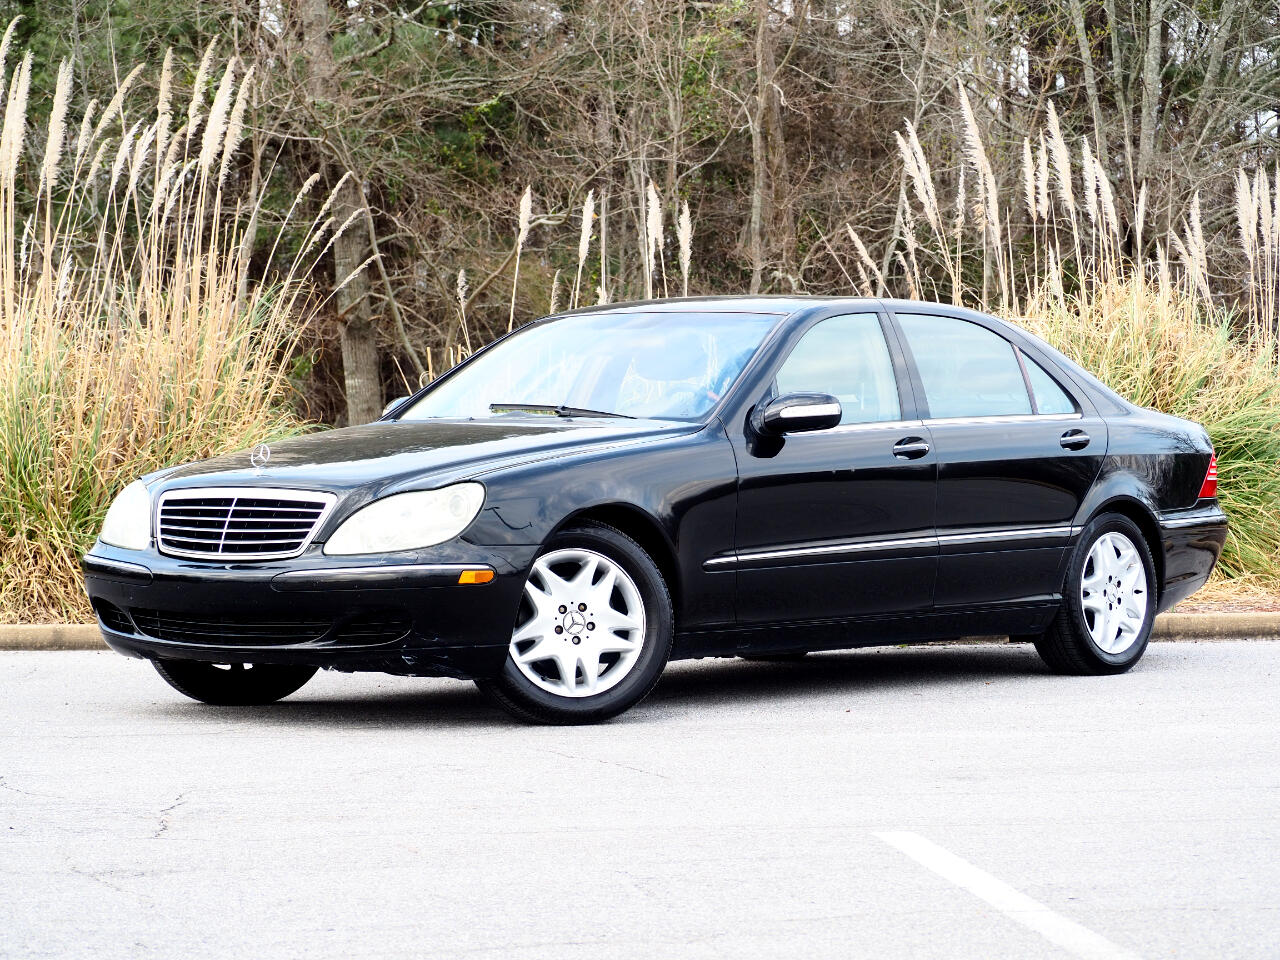 Used 2003 Mercedes-Benz S-Class S430 for Sale in Richland MS 39157 Dash  Auto House